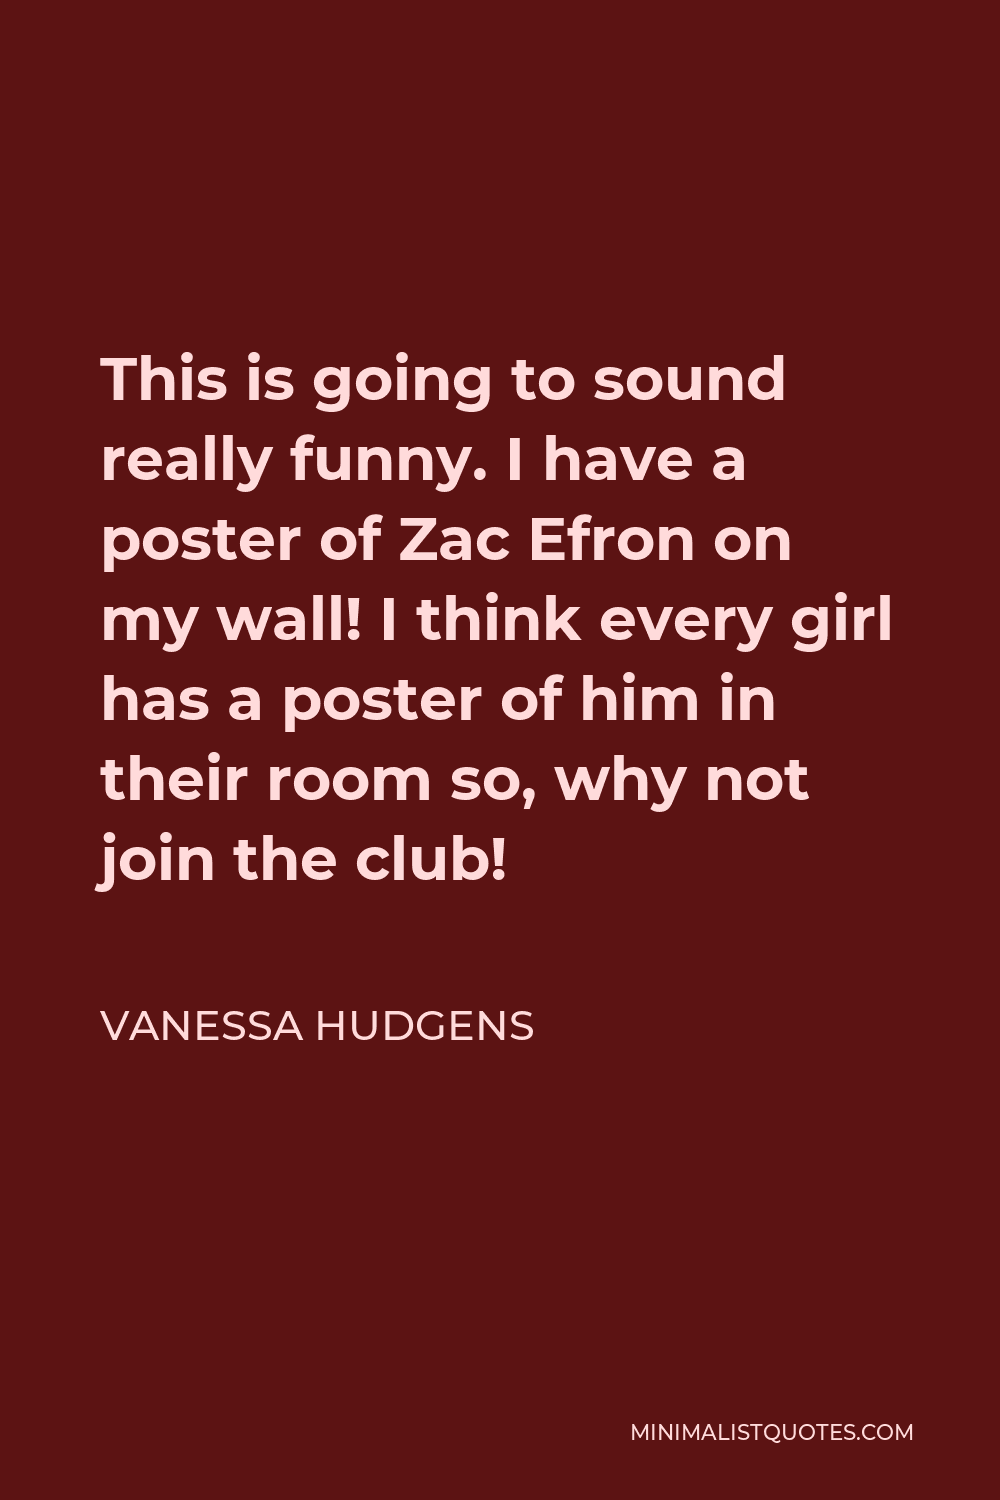 Vanessa Hudgens Quote - This is going to sound really funny. I have a poster of Zac Efron on my wall! I think every girl has a poster of him in their room so, why not join the club!